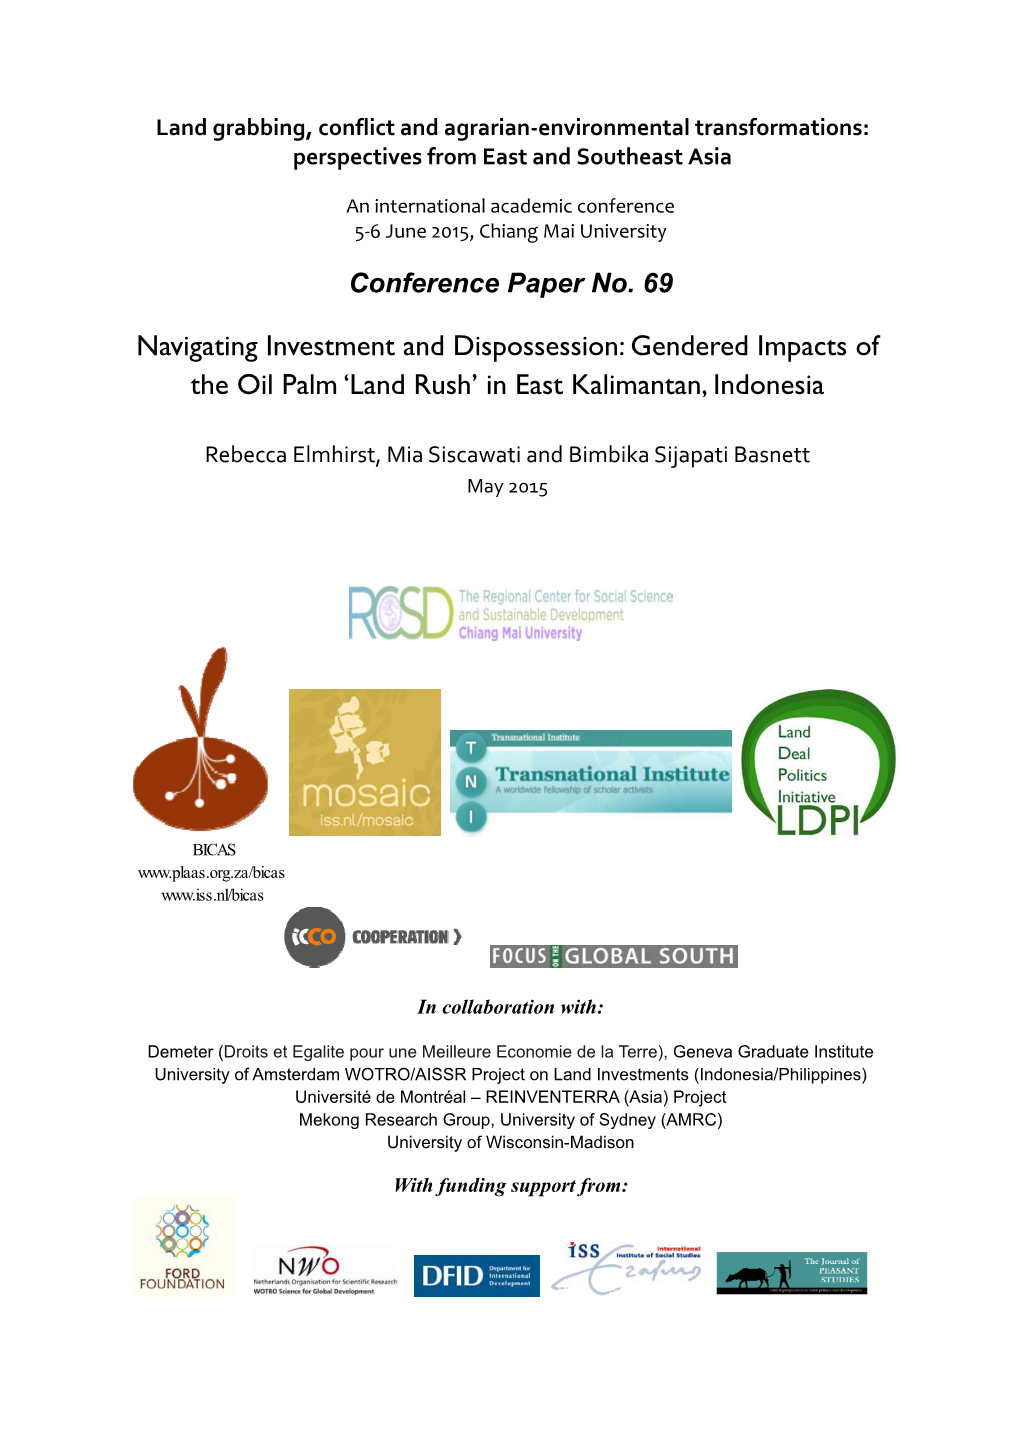 Gendered Impacts of the Oil Palm ‘Land Rush’ in East Kalimantan, Indonesia